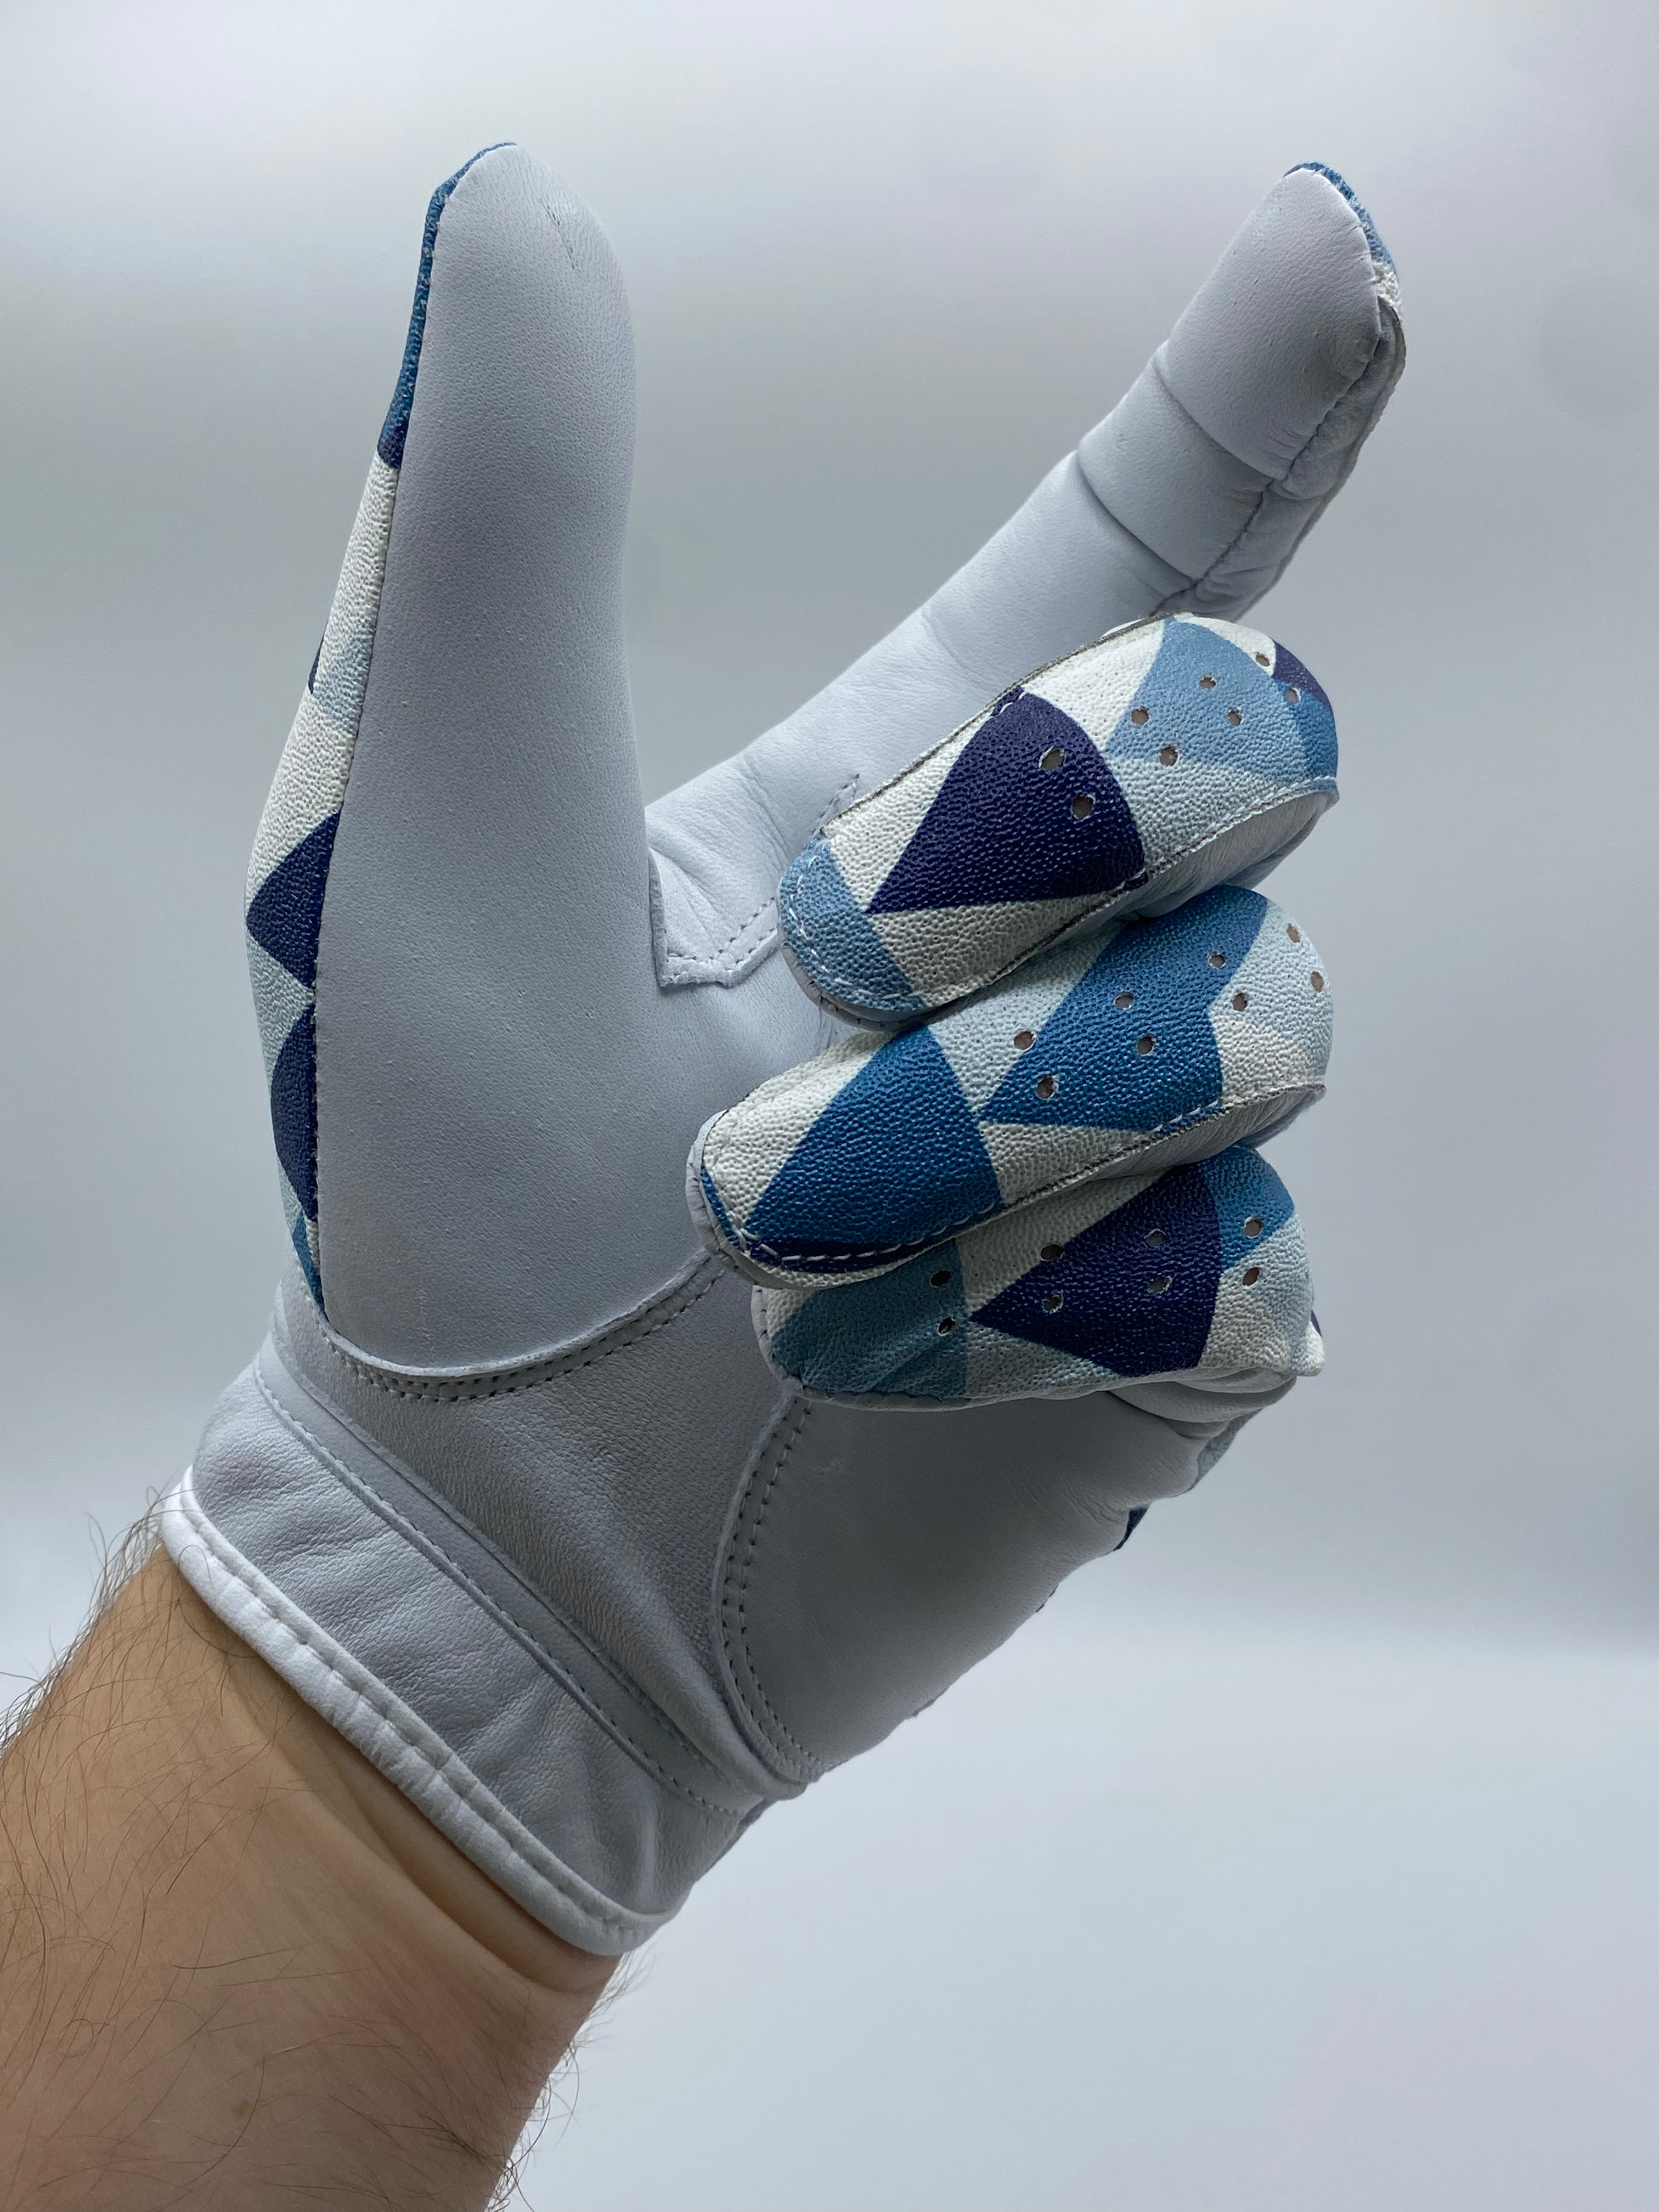 How to chose the right size golf glove